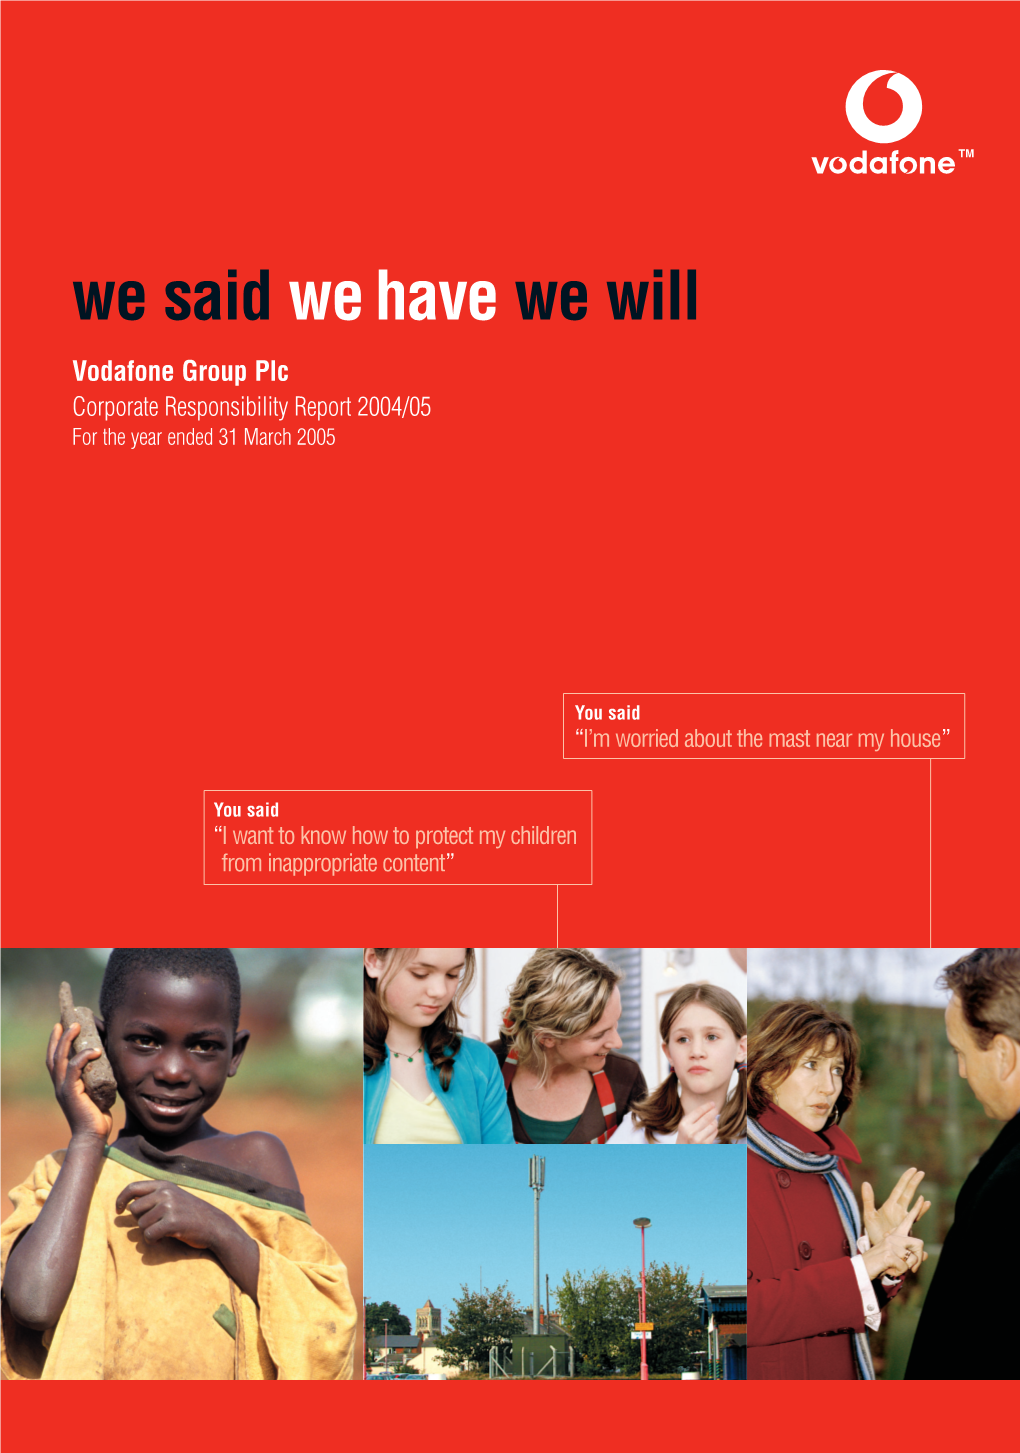 We Said We Have We Will Vodafone Group Plc Corporate Responsibility Report 2004/05 for the Year Ended 31 March 2005